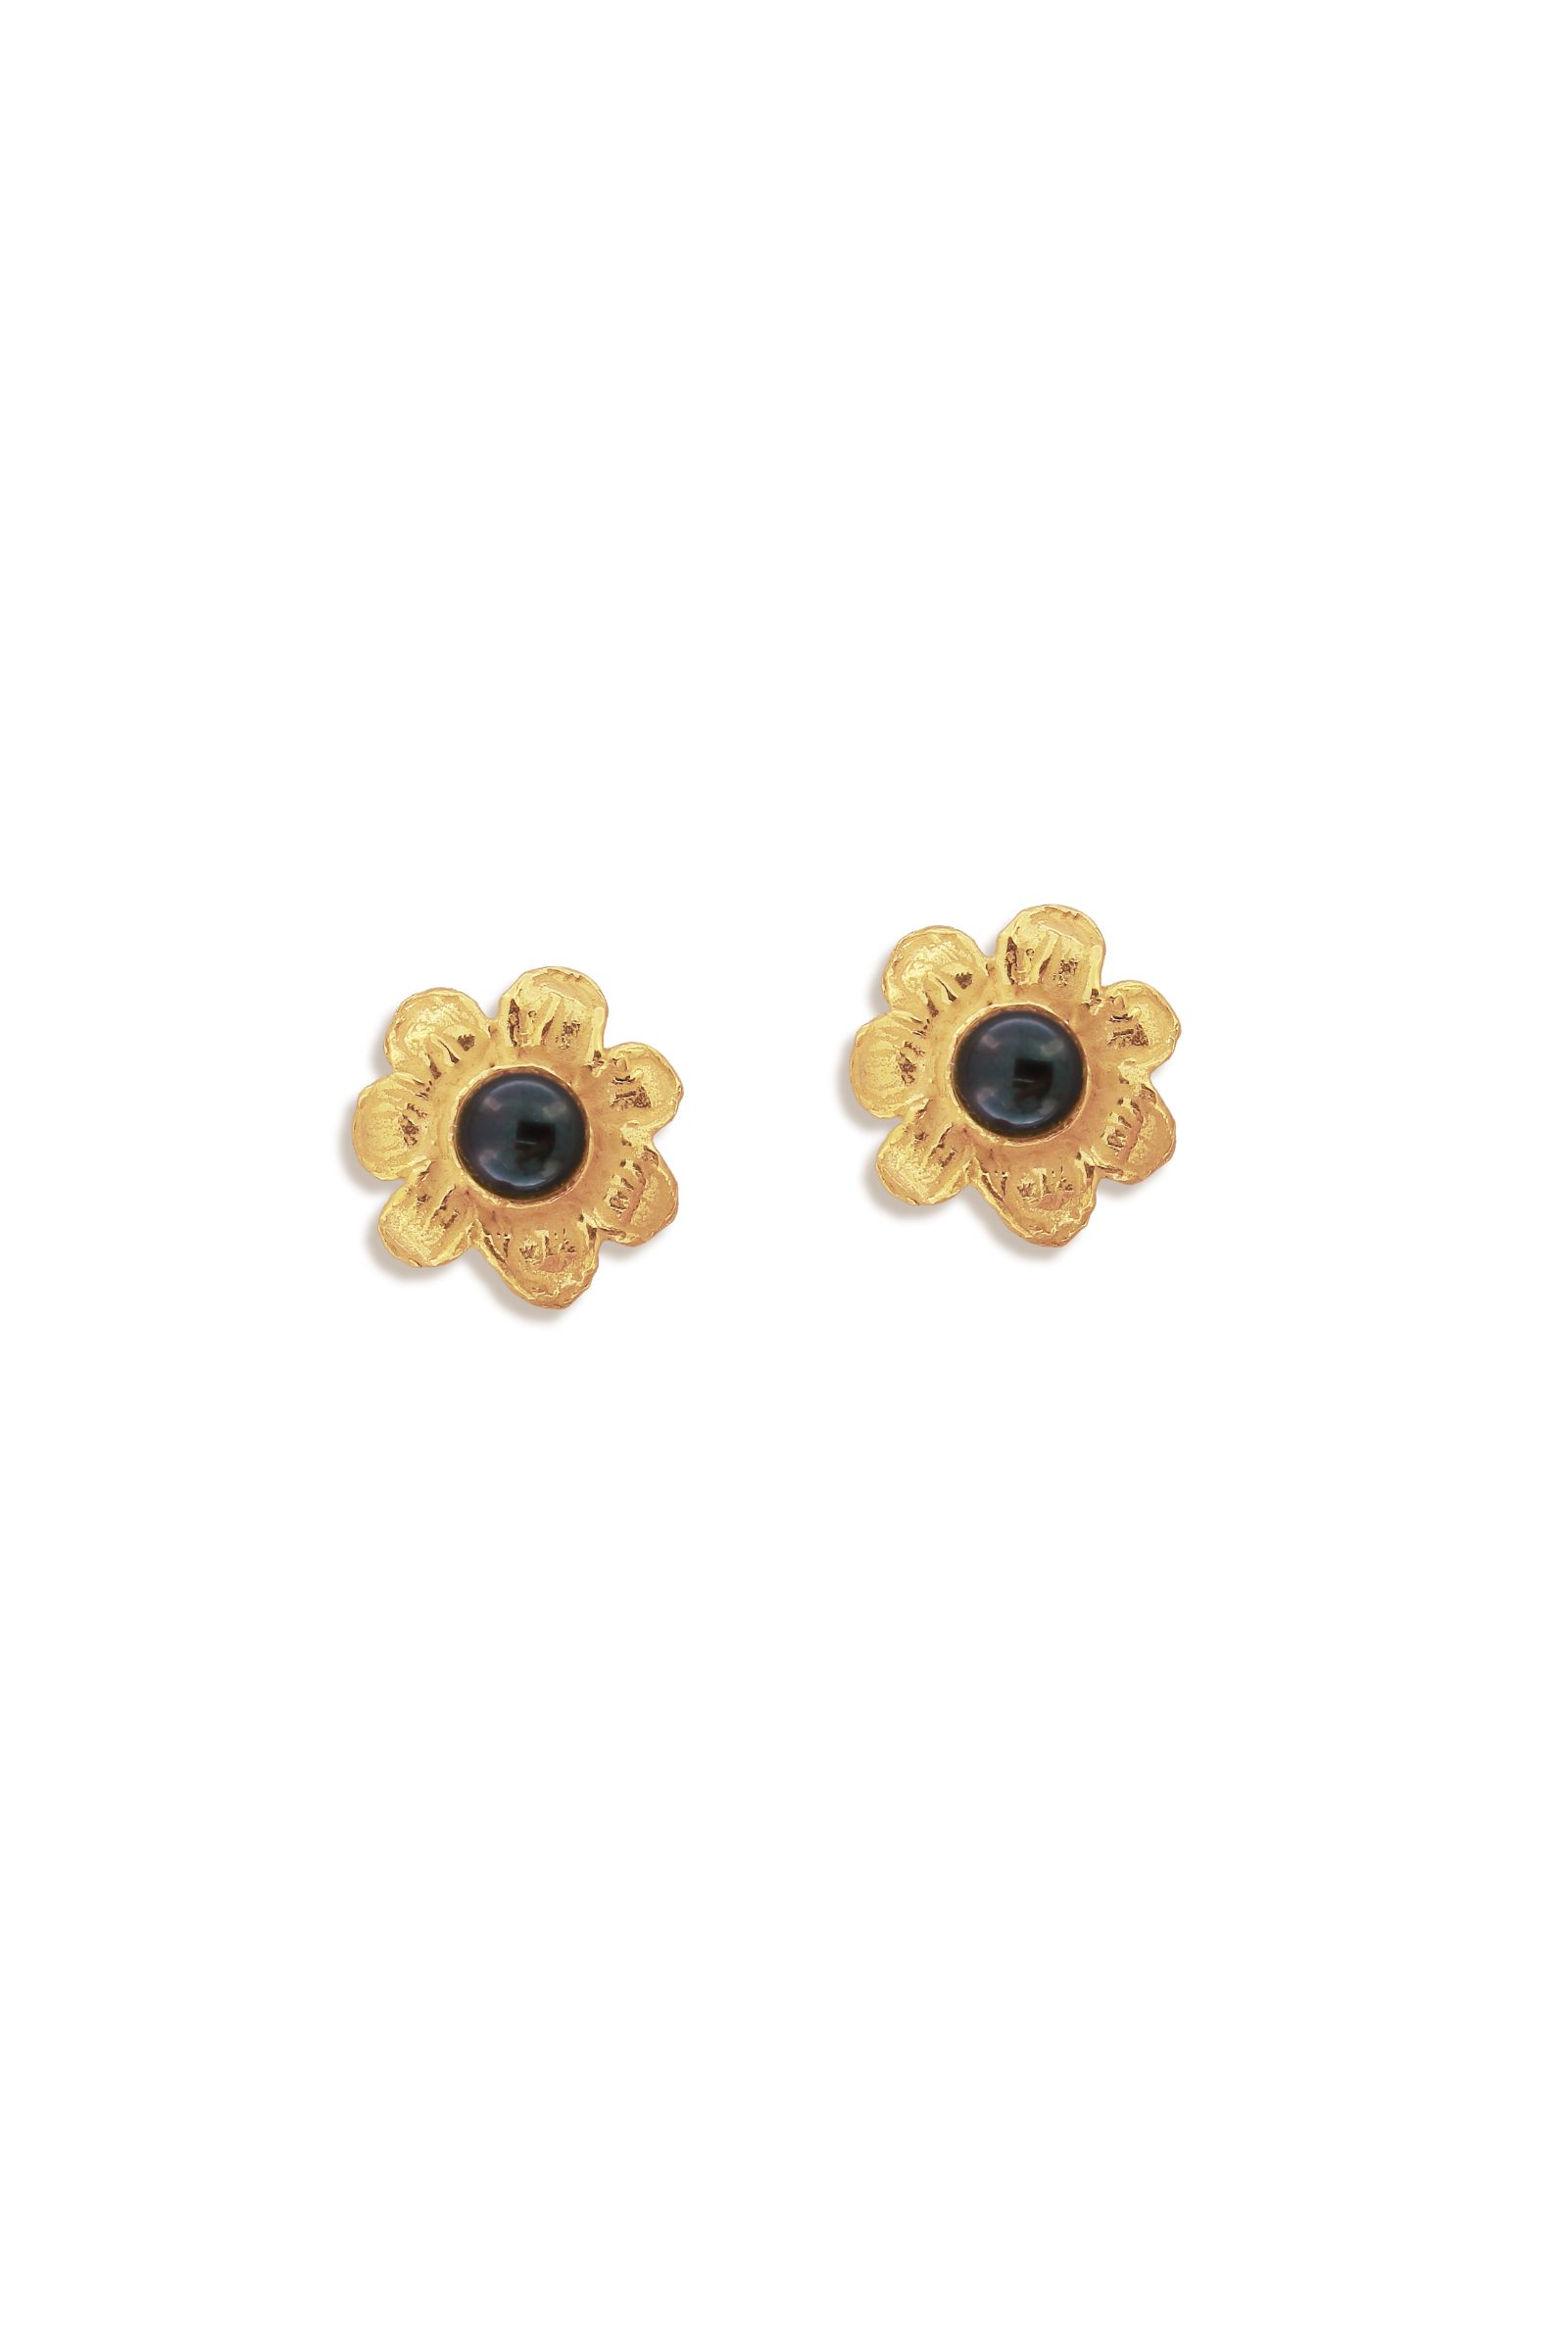 SD194A-18-Kt-Yellow-Gold-Flowers-Earrings-with-Black-Perals-1.jpg